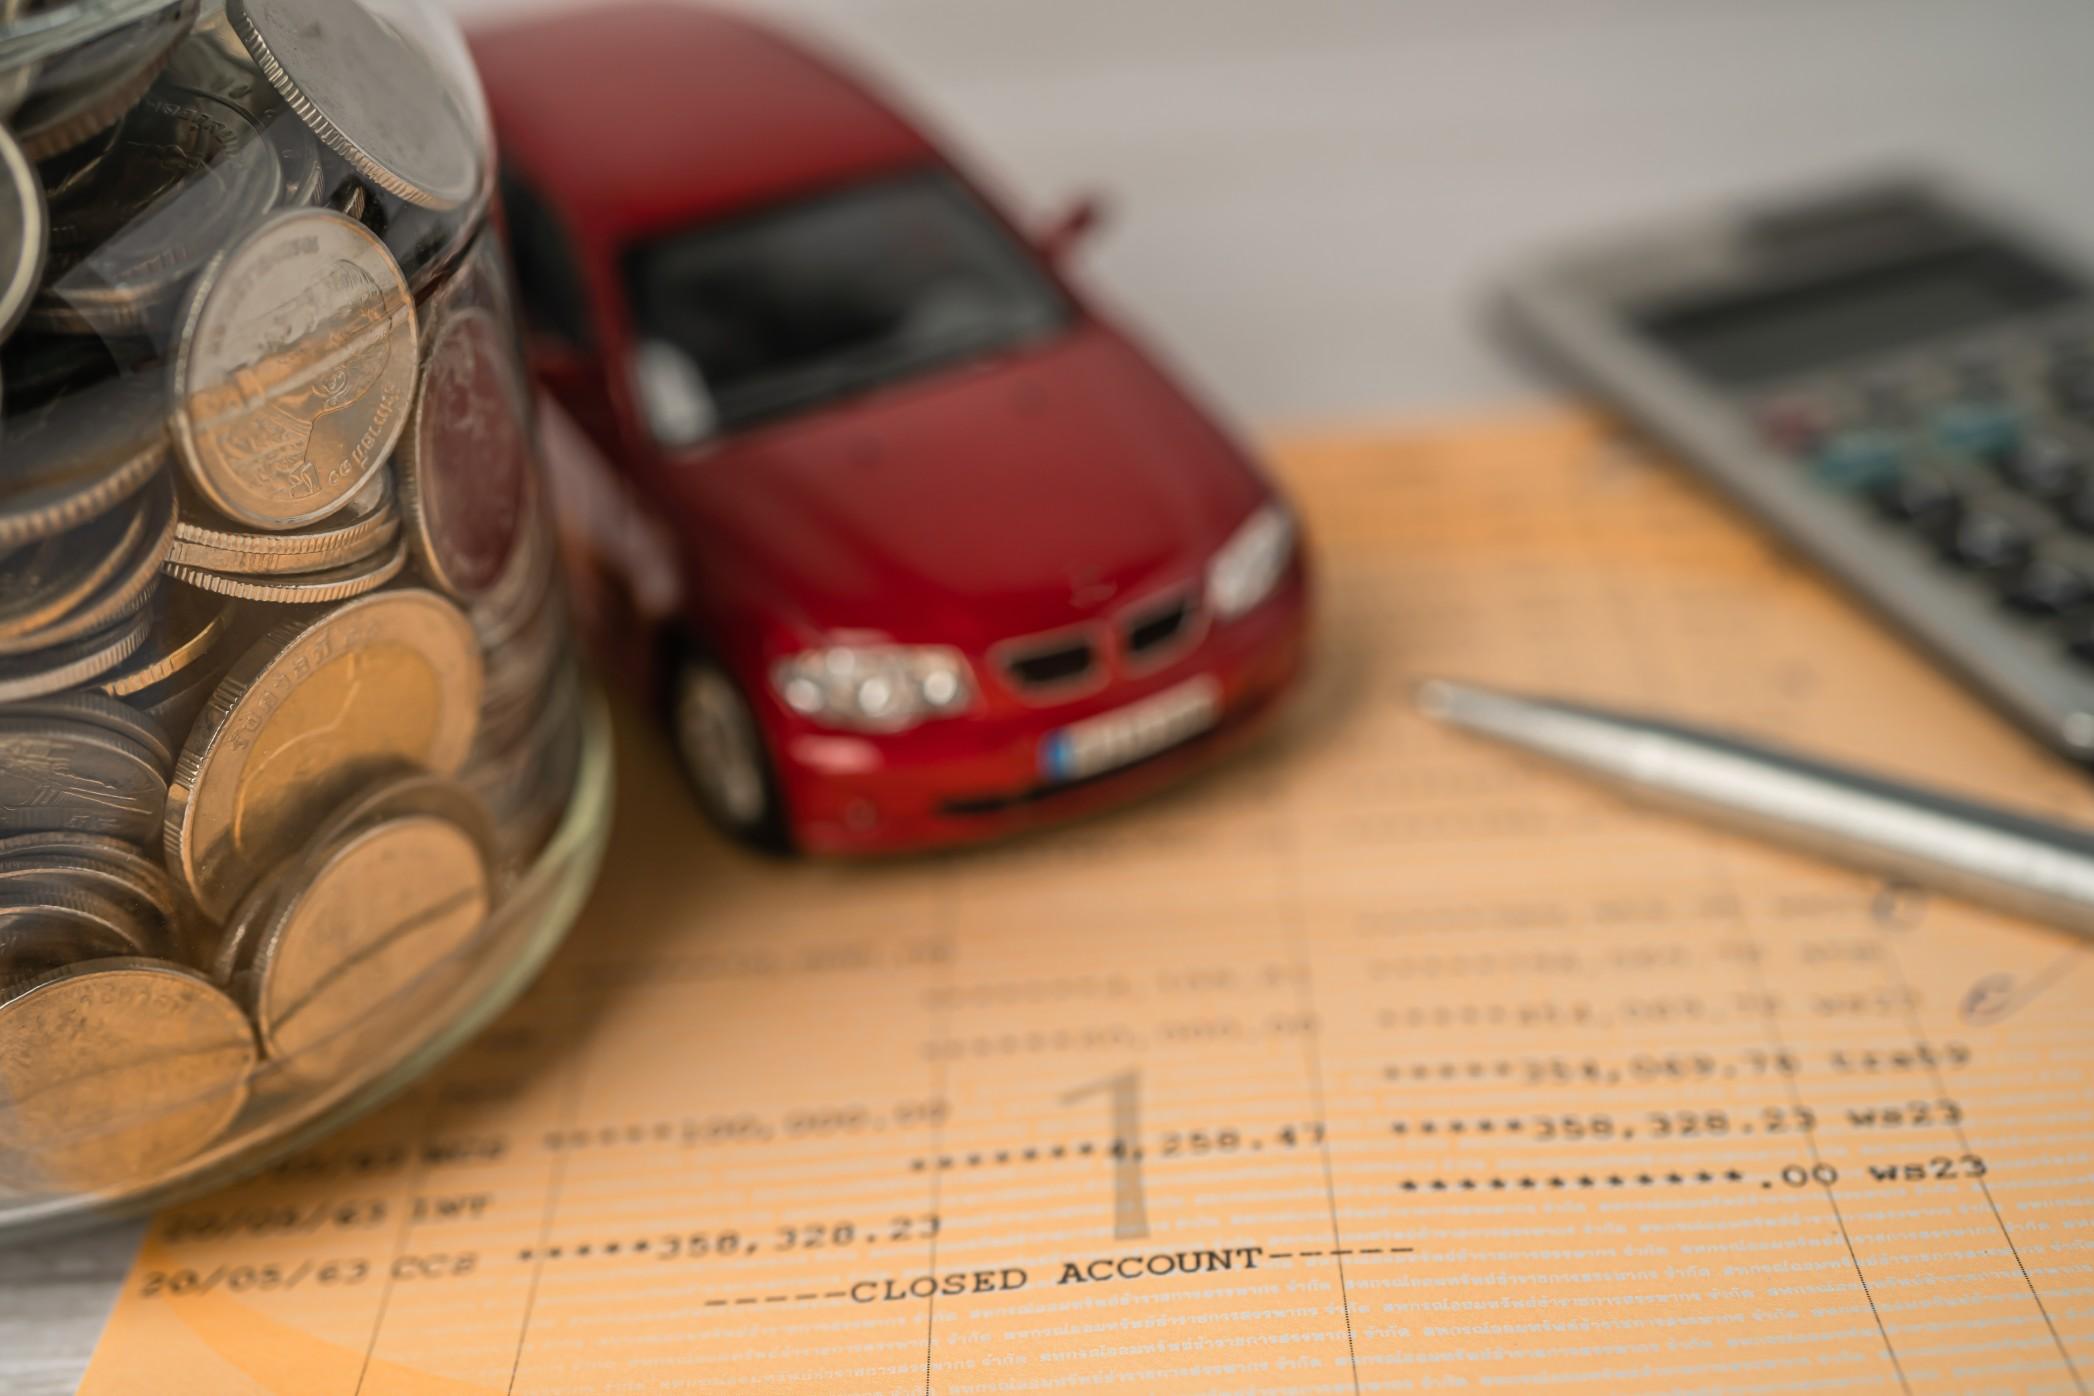 There are plenty of ways to save money on a good car and its expenses.